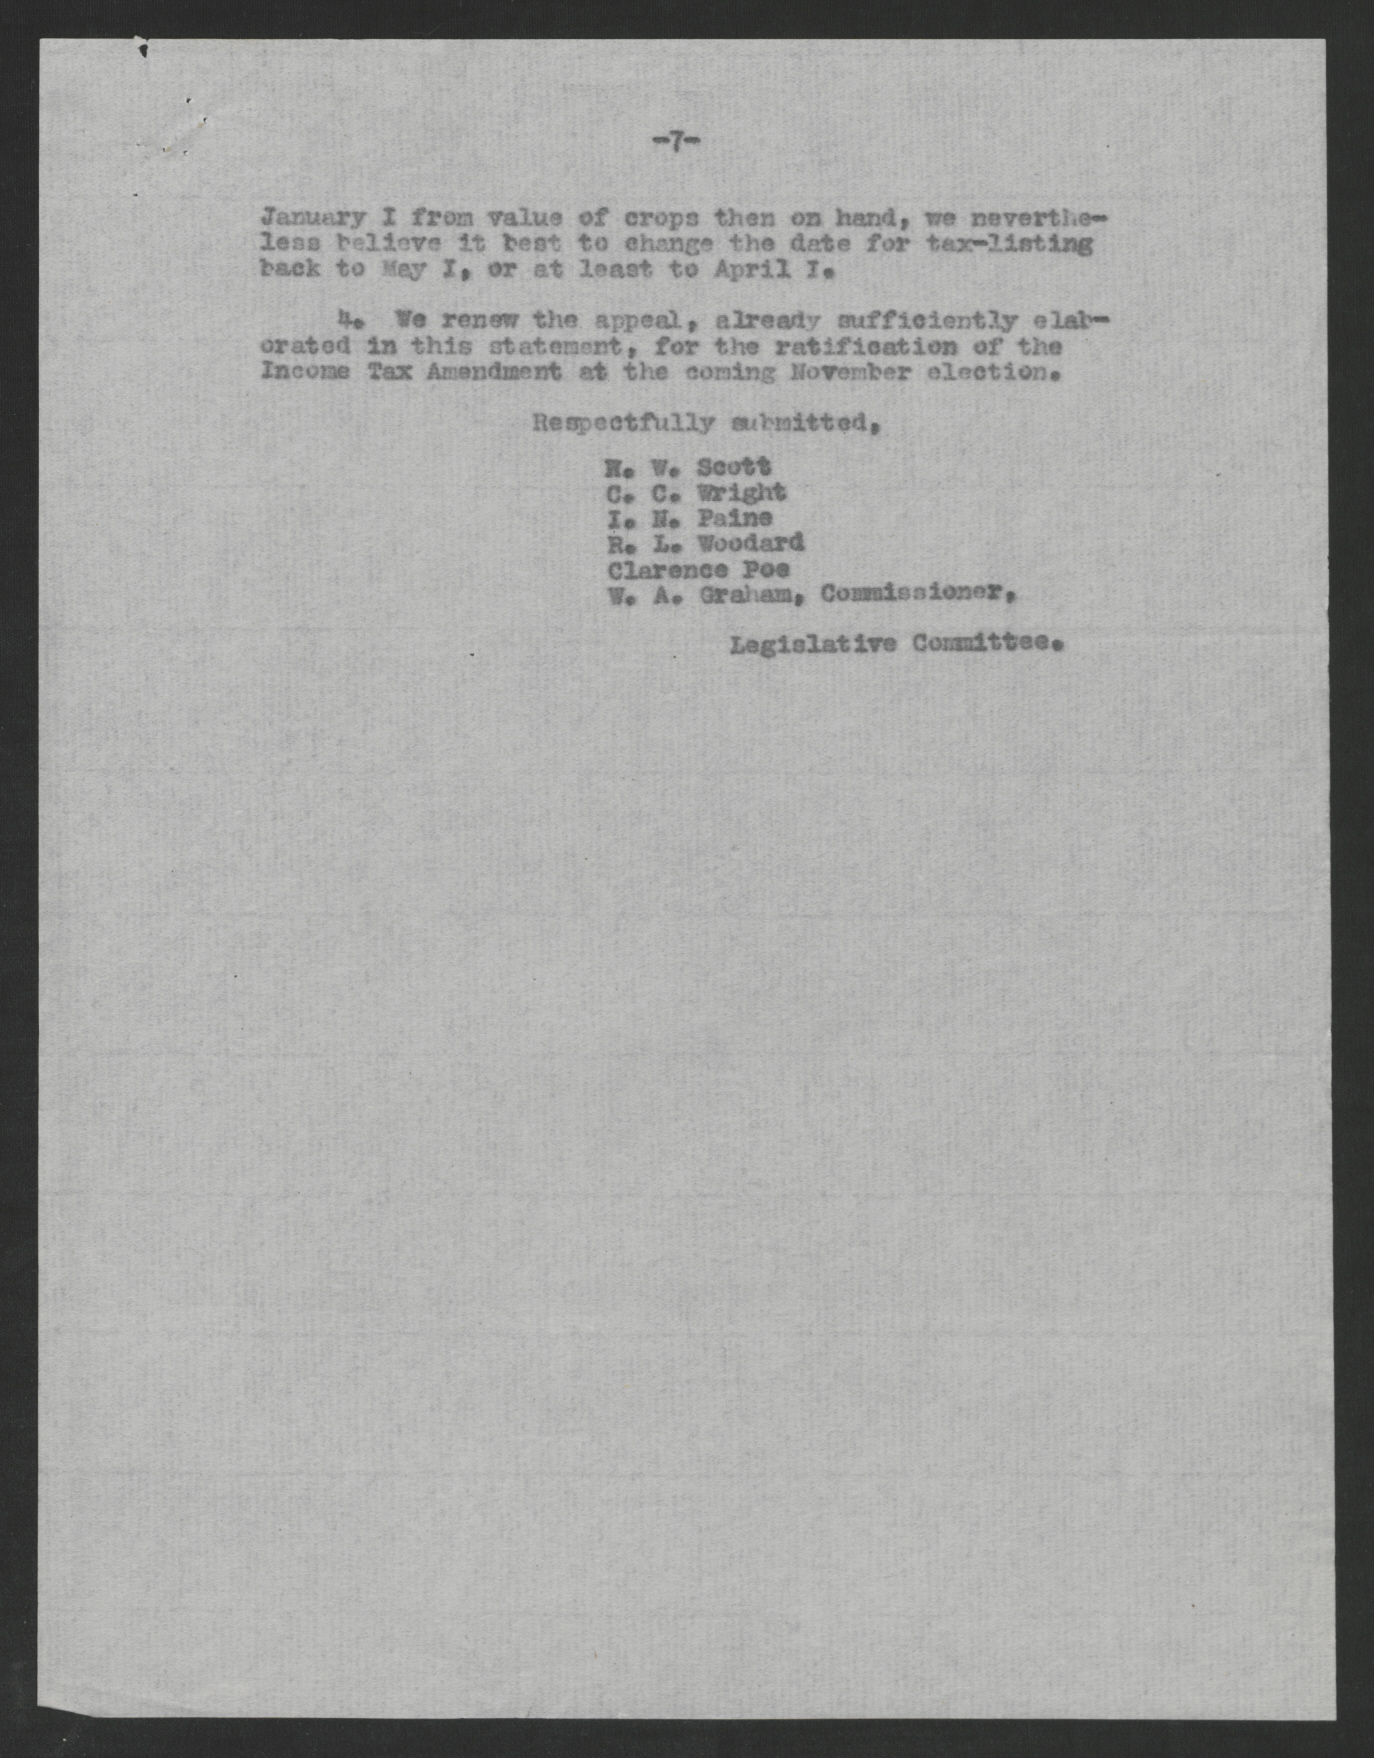 Report of the Legislative Committee of the North Carolina State Board of Agriculture, August 18, 1920, page 7